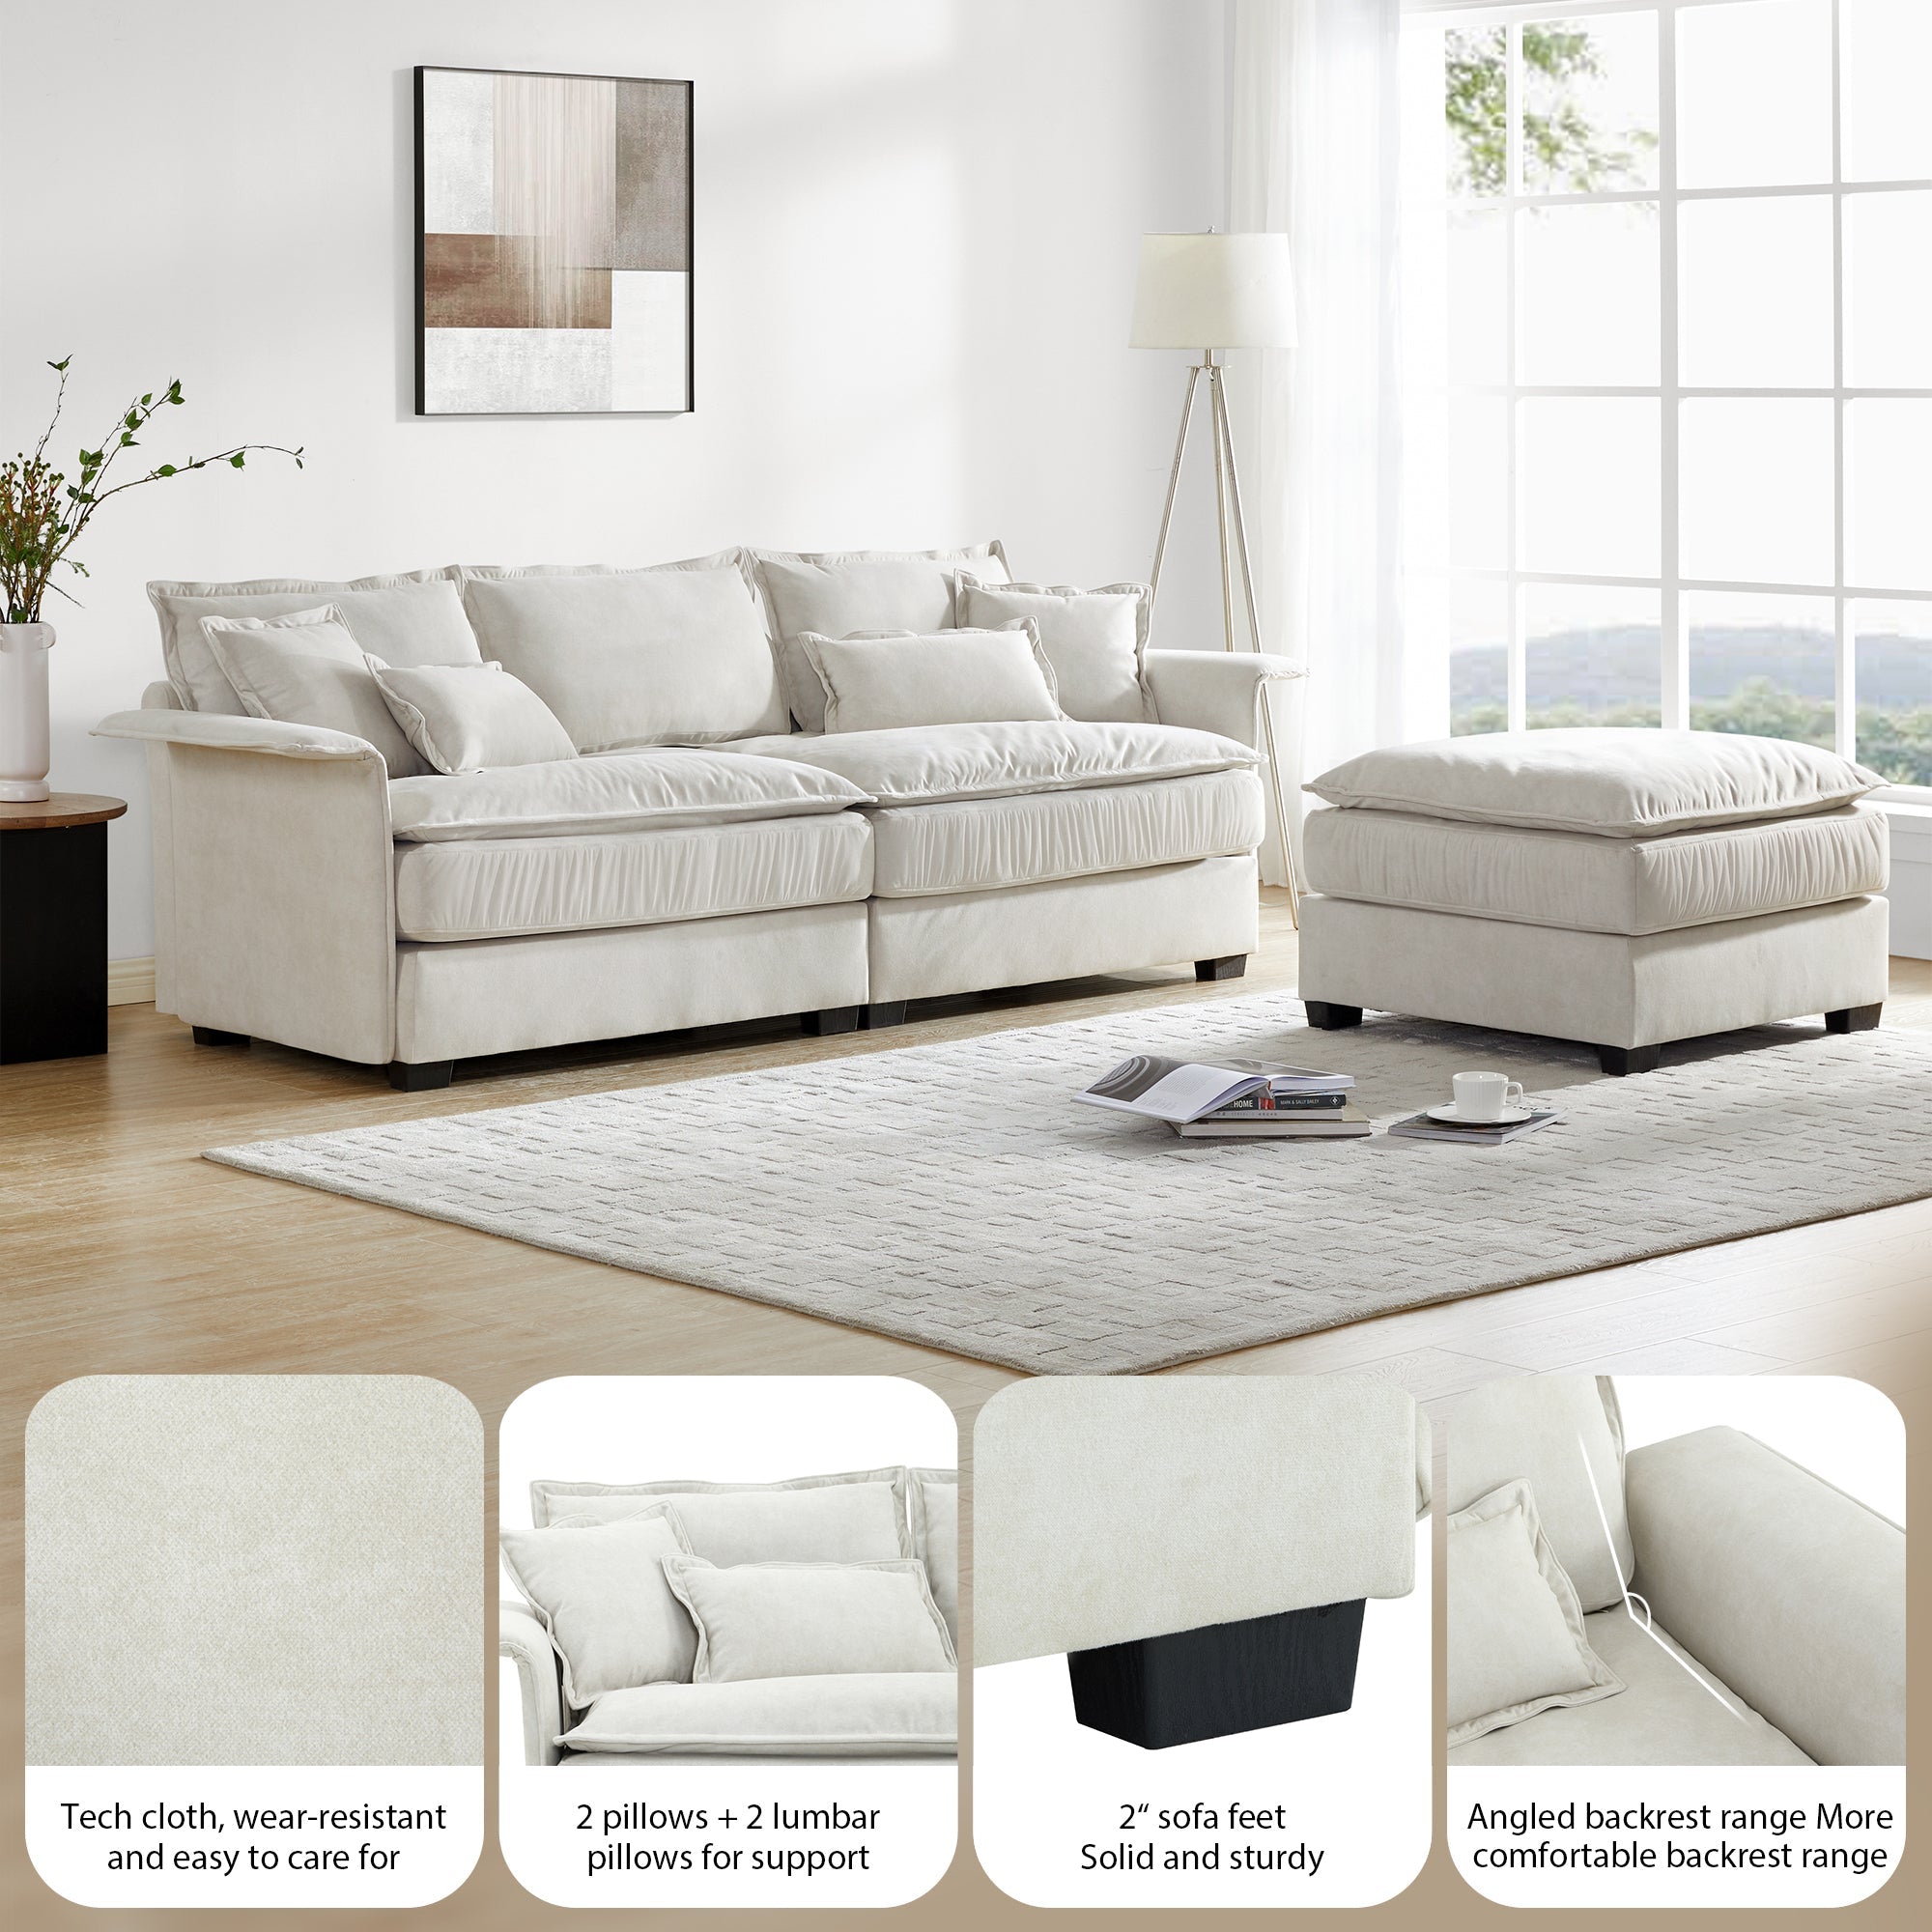 95" L-Shaped Sectional Sofa with Ottoman - Oversized 4-Seat Couch w/ Bentwood Arms - Beige-Stationary Sectionals-American Furniture Outlet